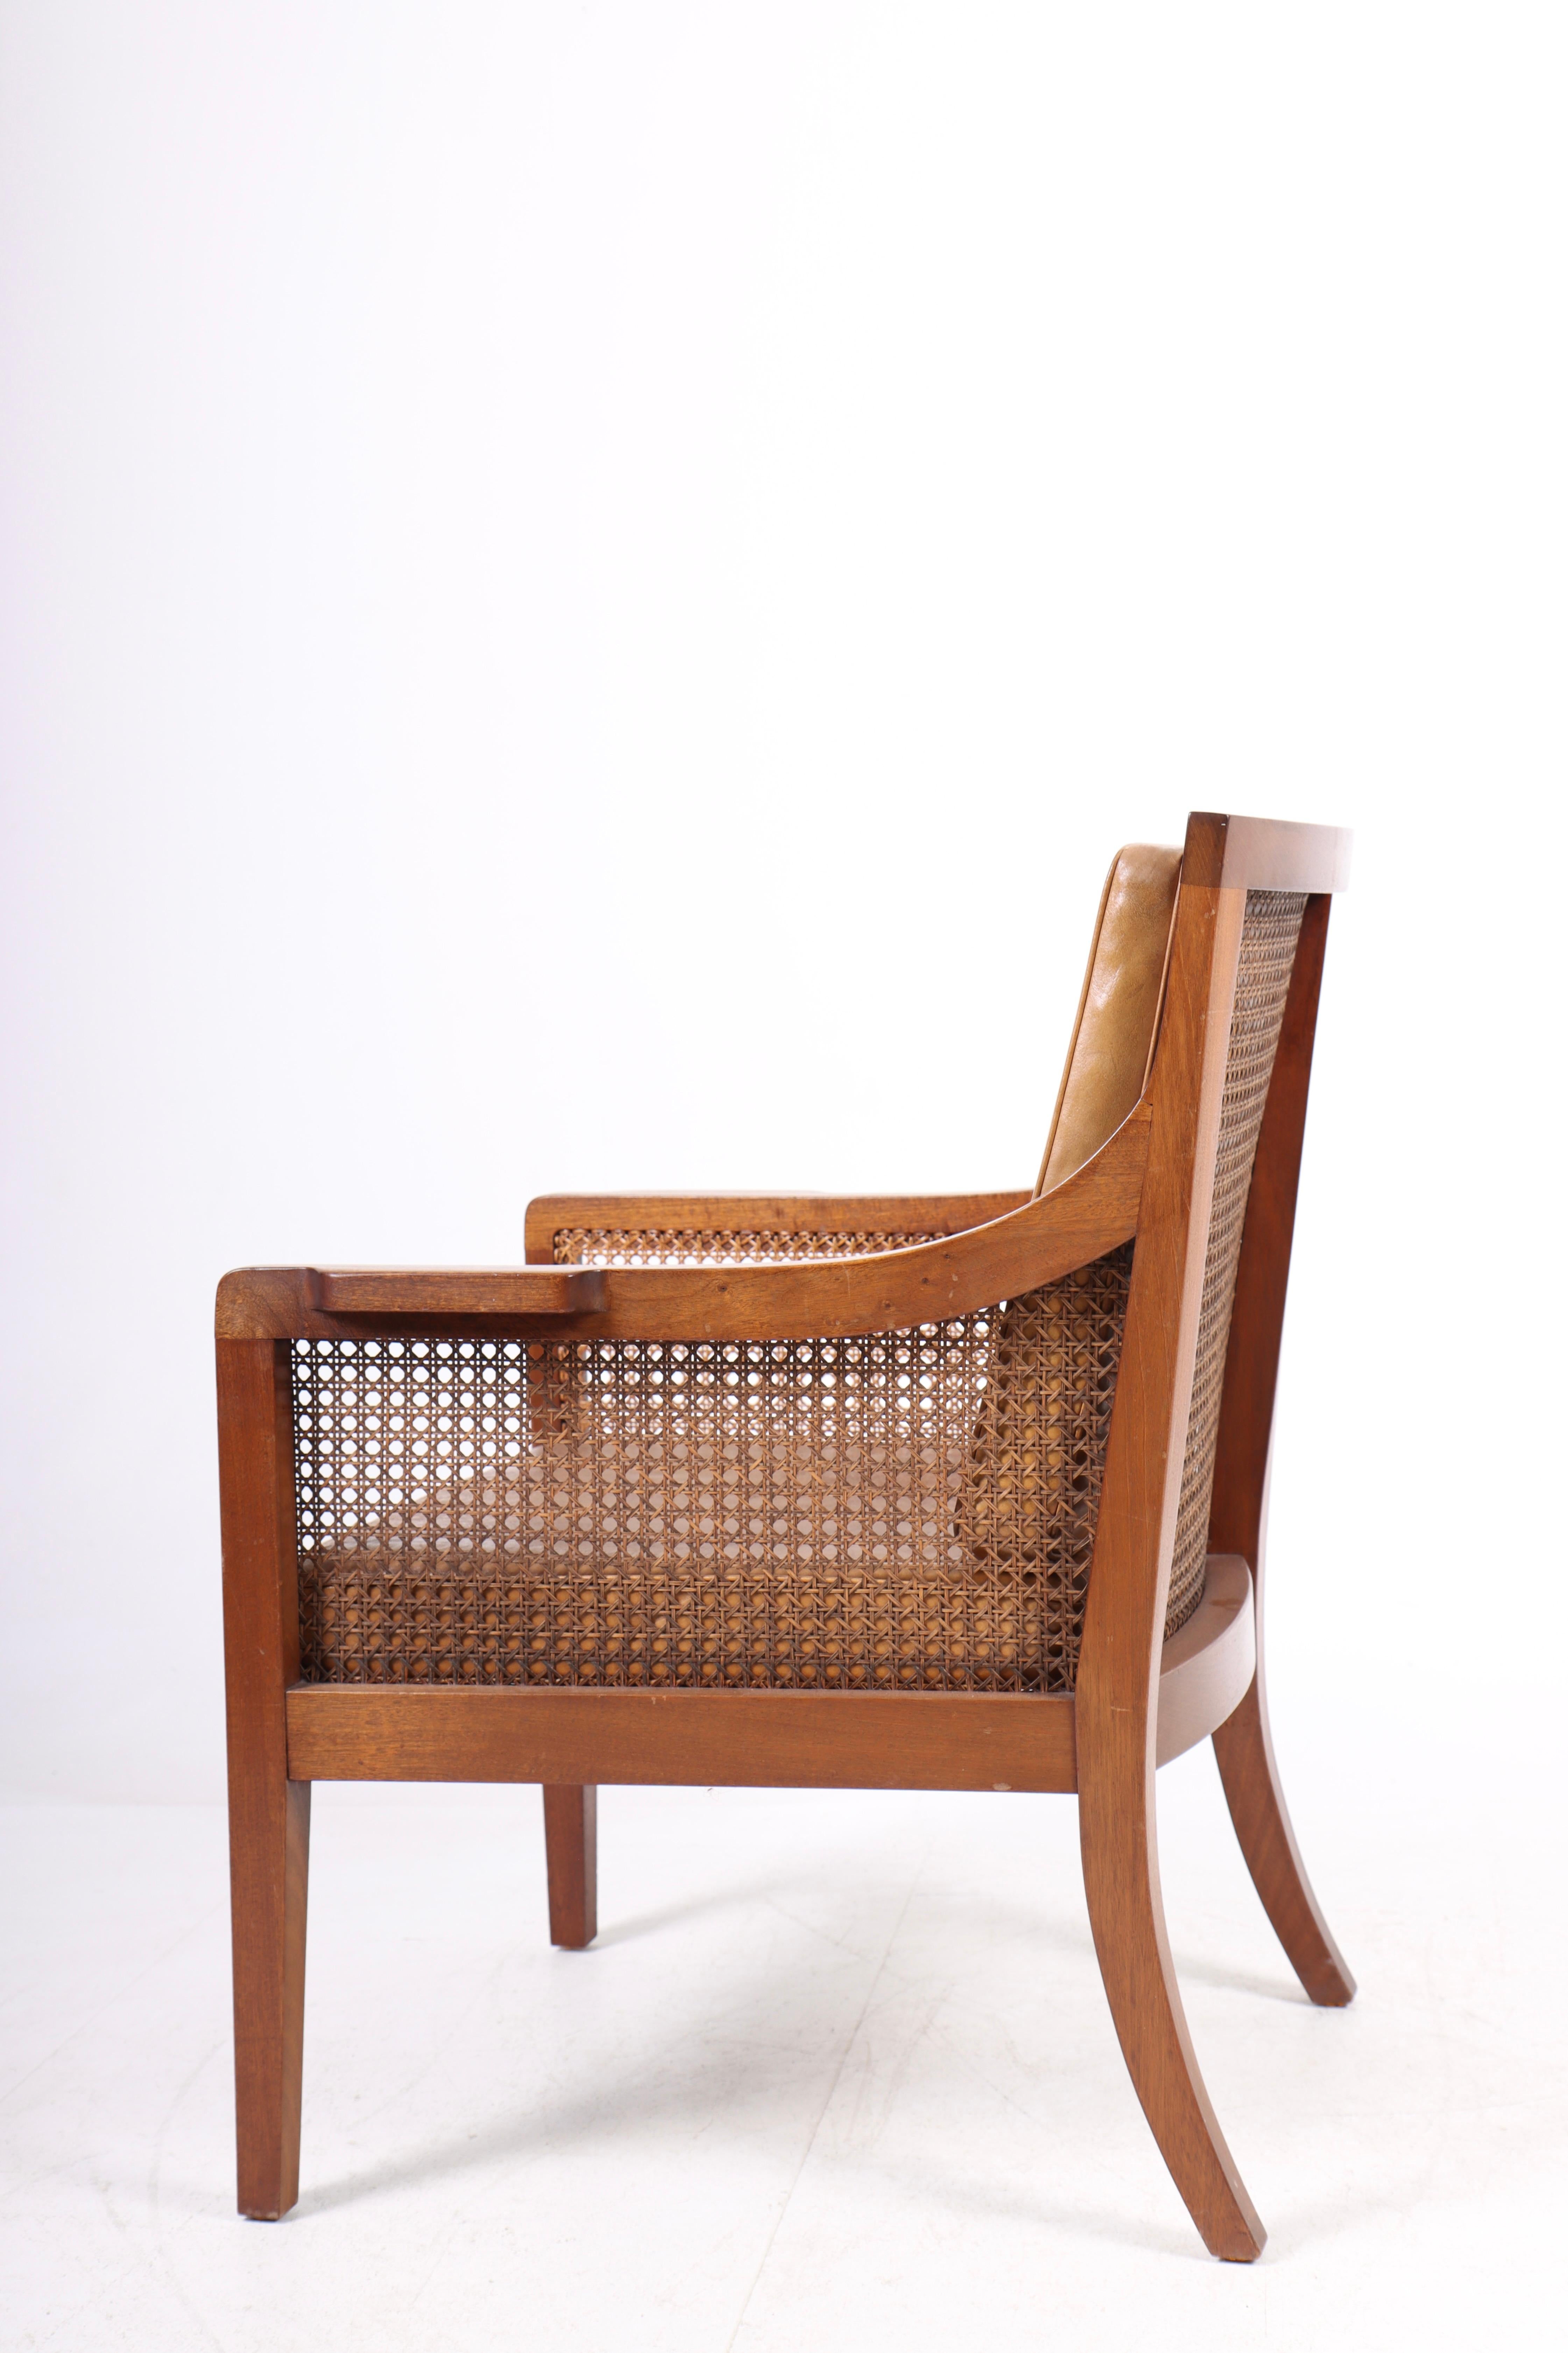 Danish Classic Lounge Chair in Mahogany and French Cane, Made in Denmark 1940s